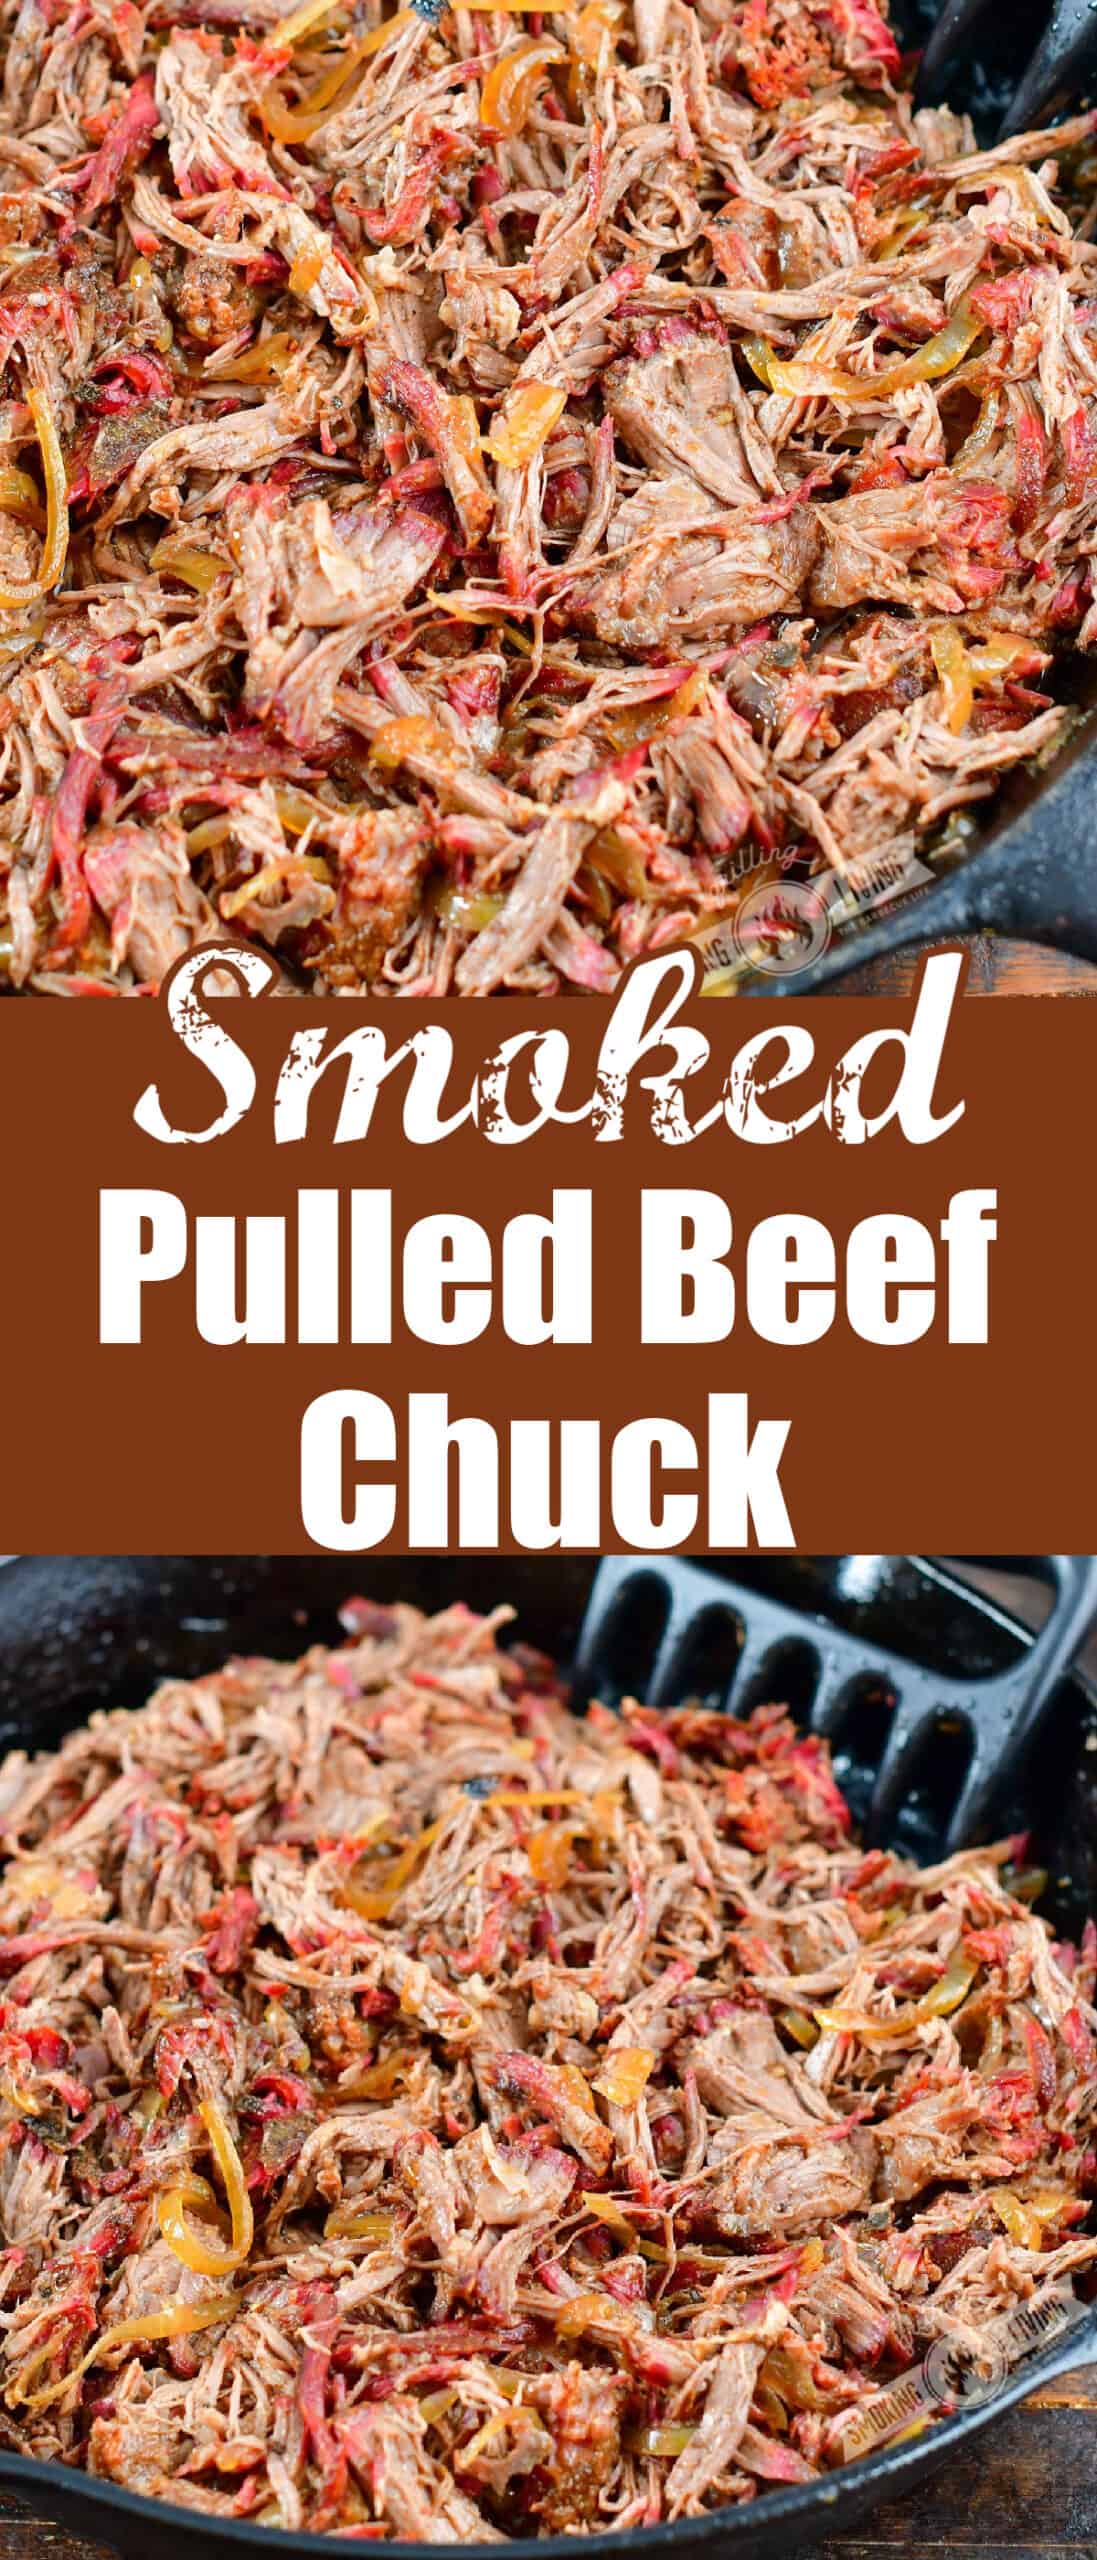 collage of two images of pulled beef in a skillet and title